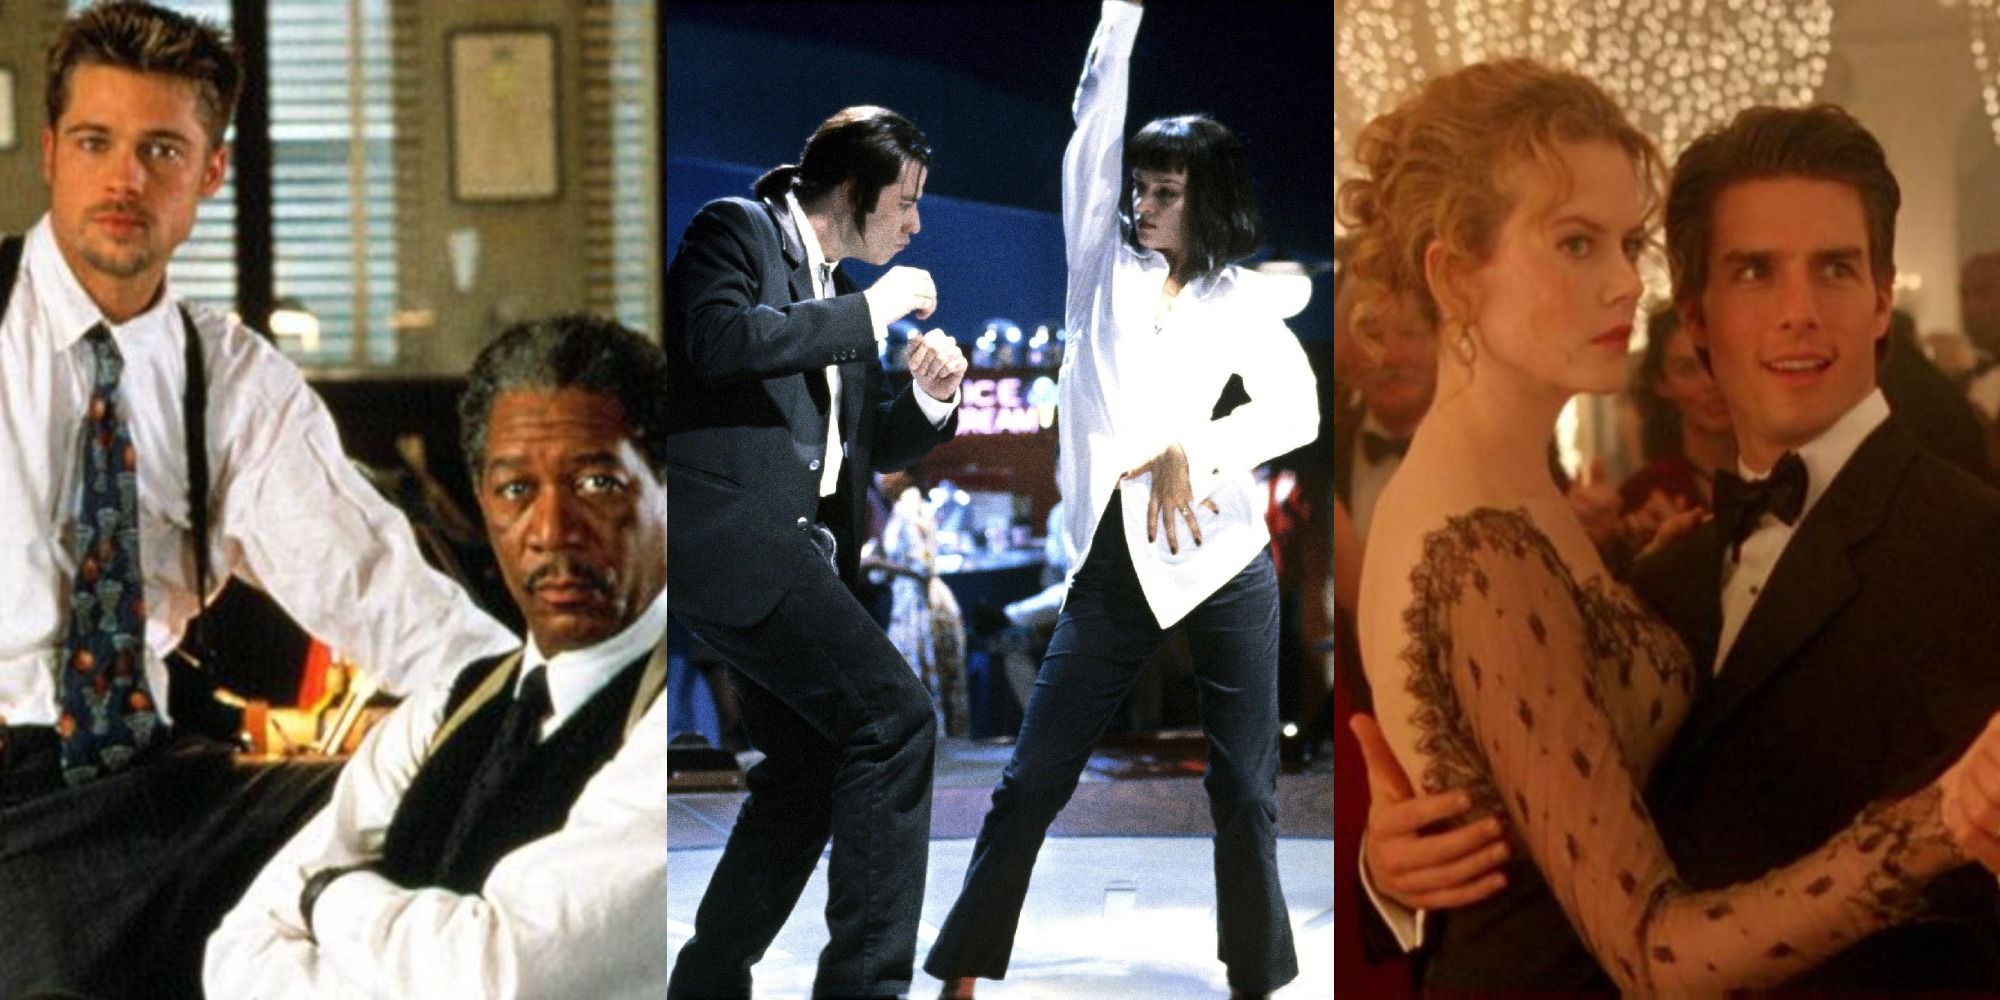 The 10 Best Action Movies Of The 90s According To Let - vrogue.co